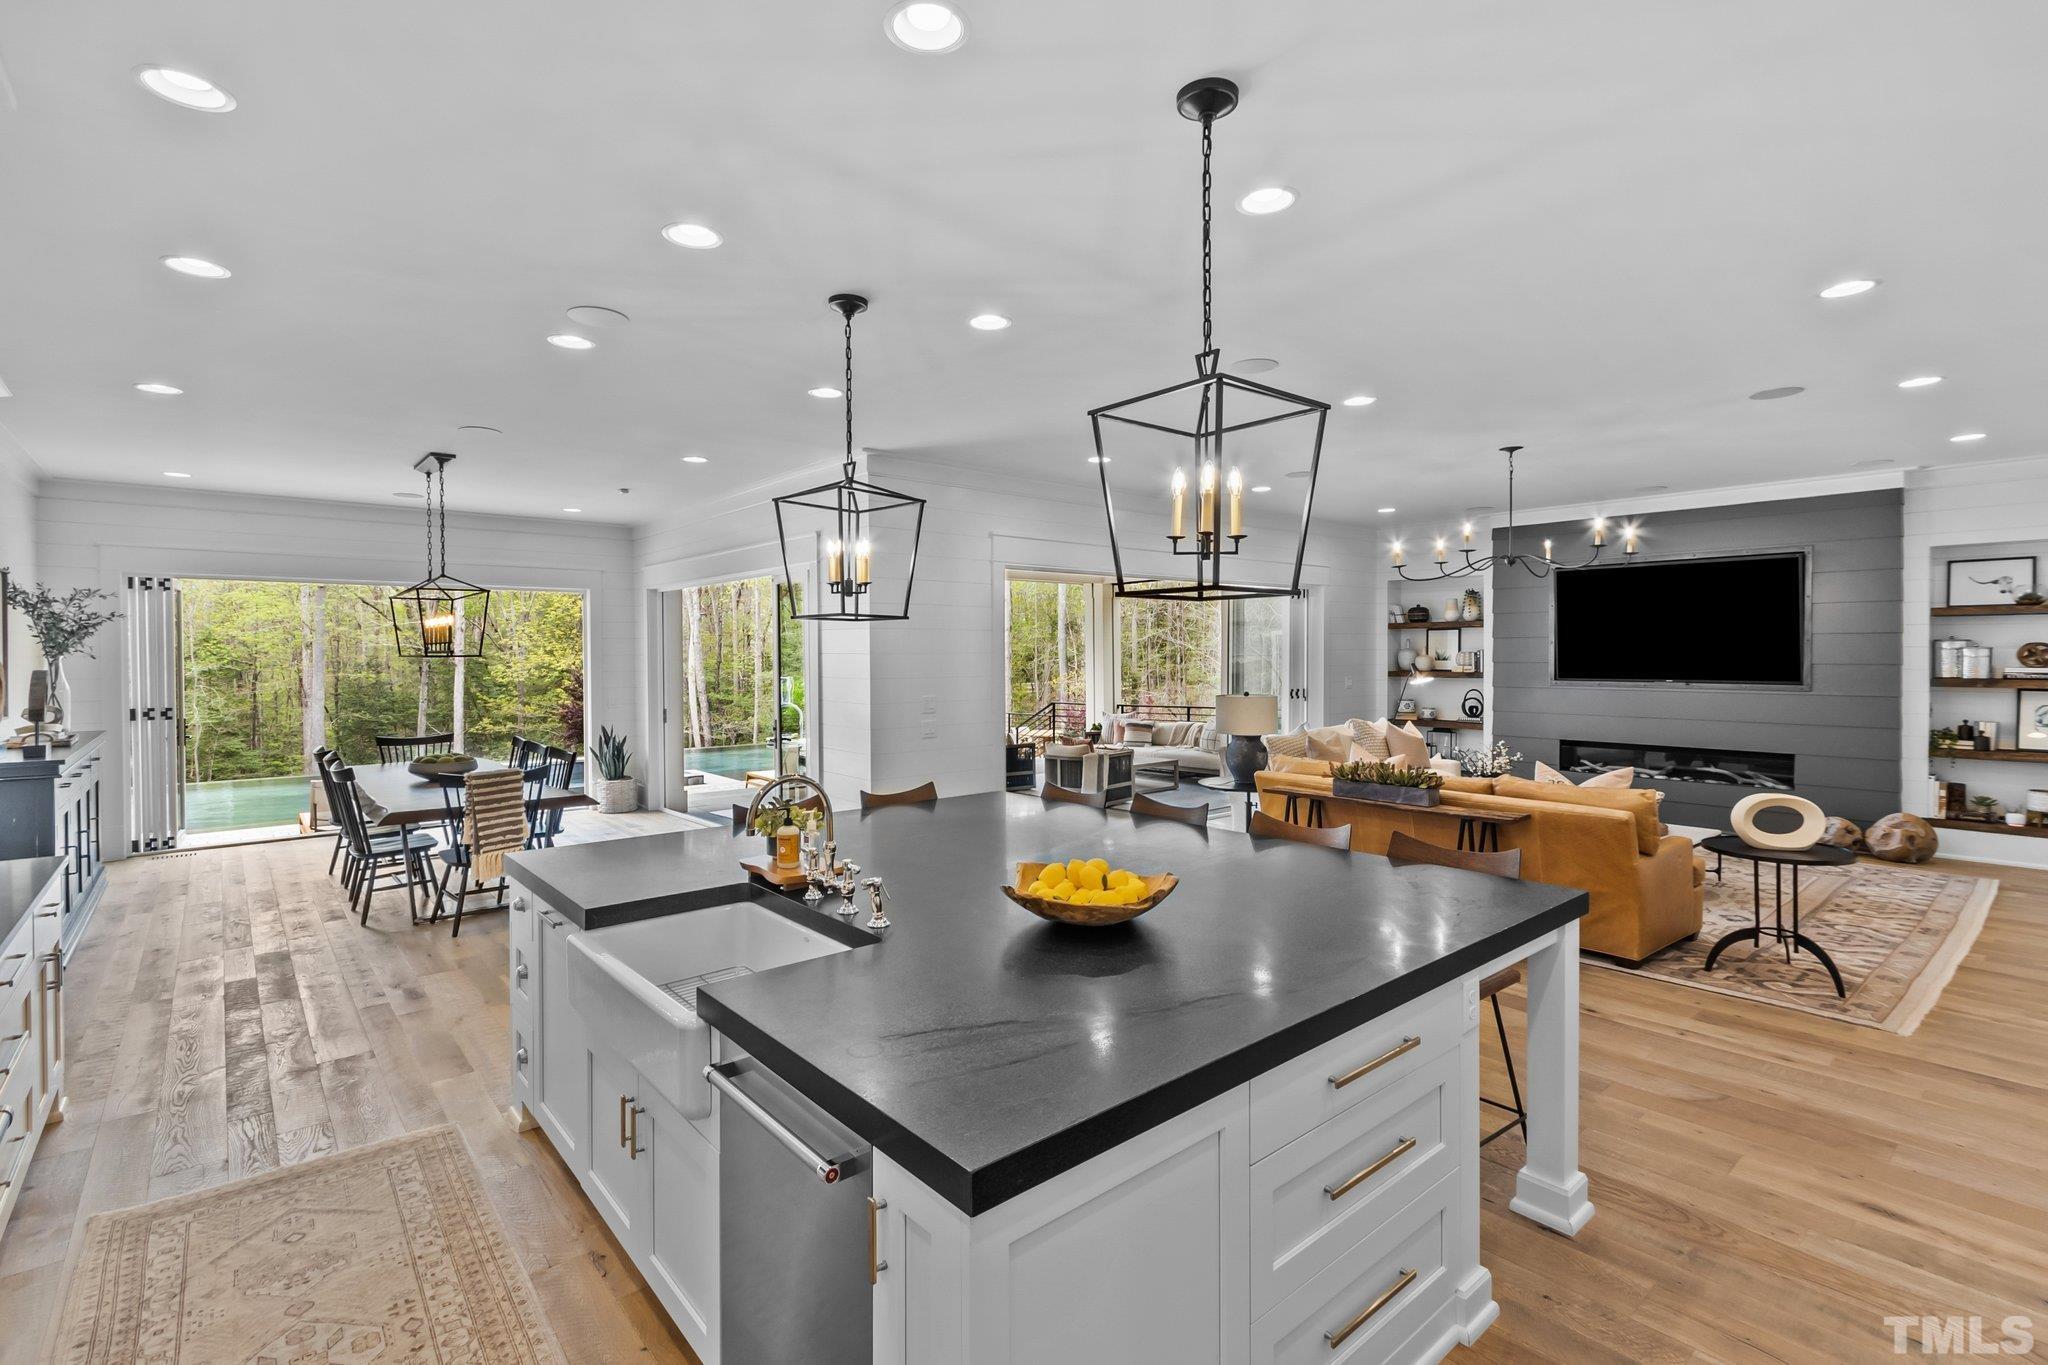 The Chef can be participate with friends and family as they gather in the kitchen, dining room, family room and screened porch as a result of the design of this one of a kind home.